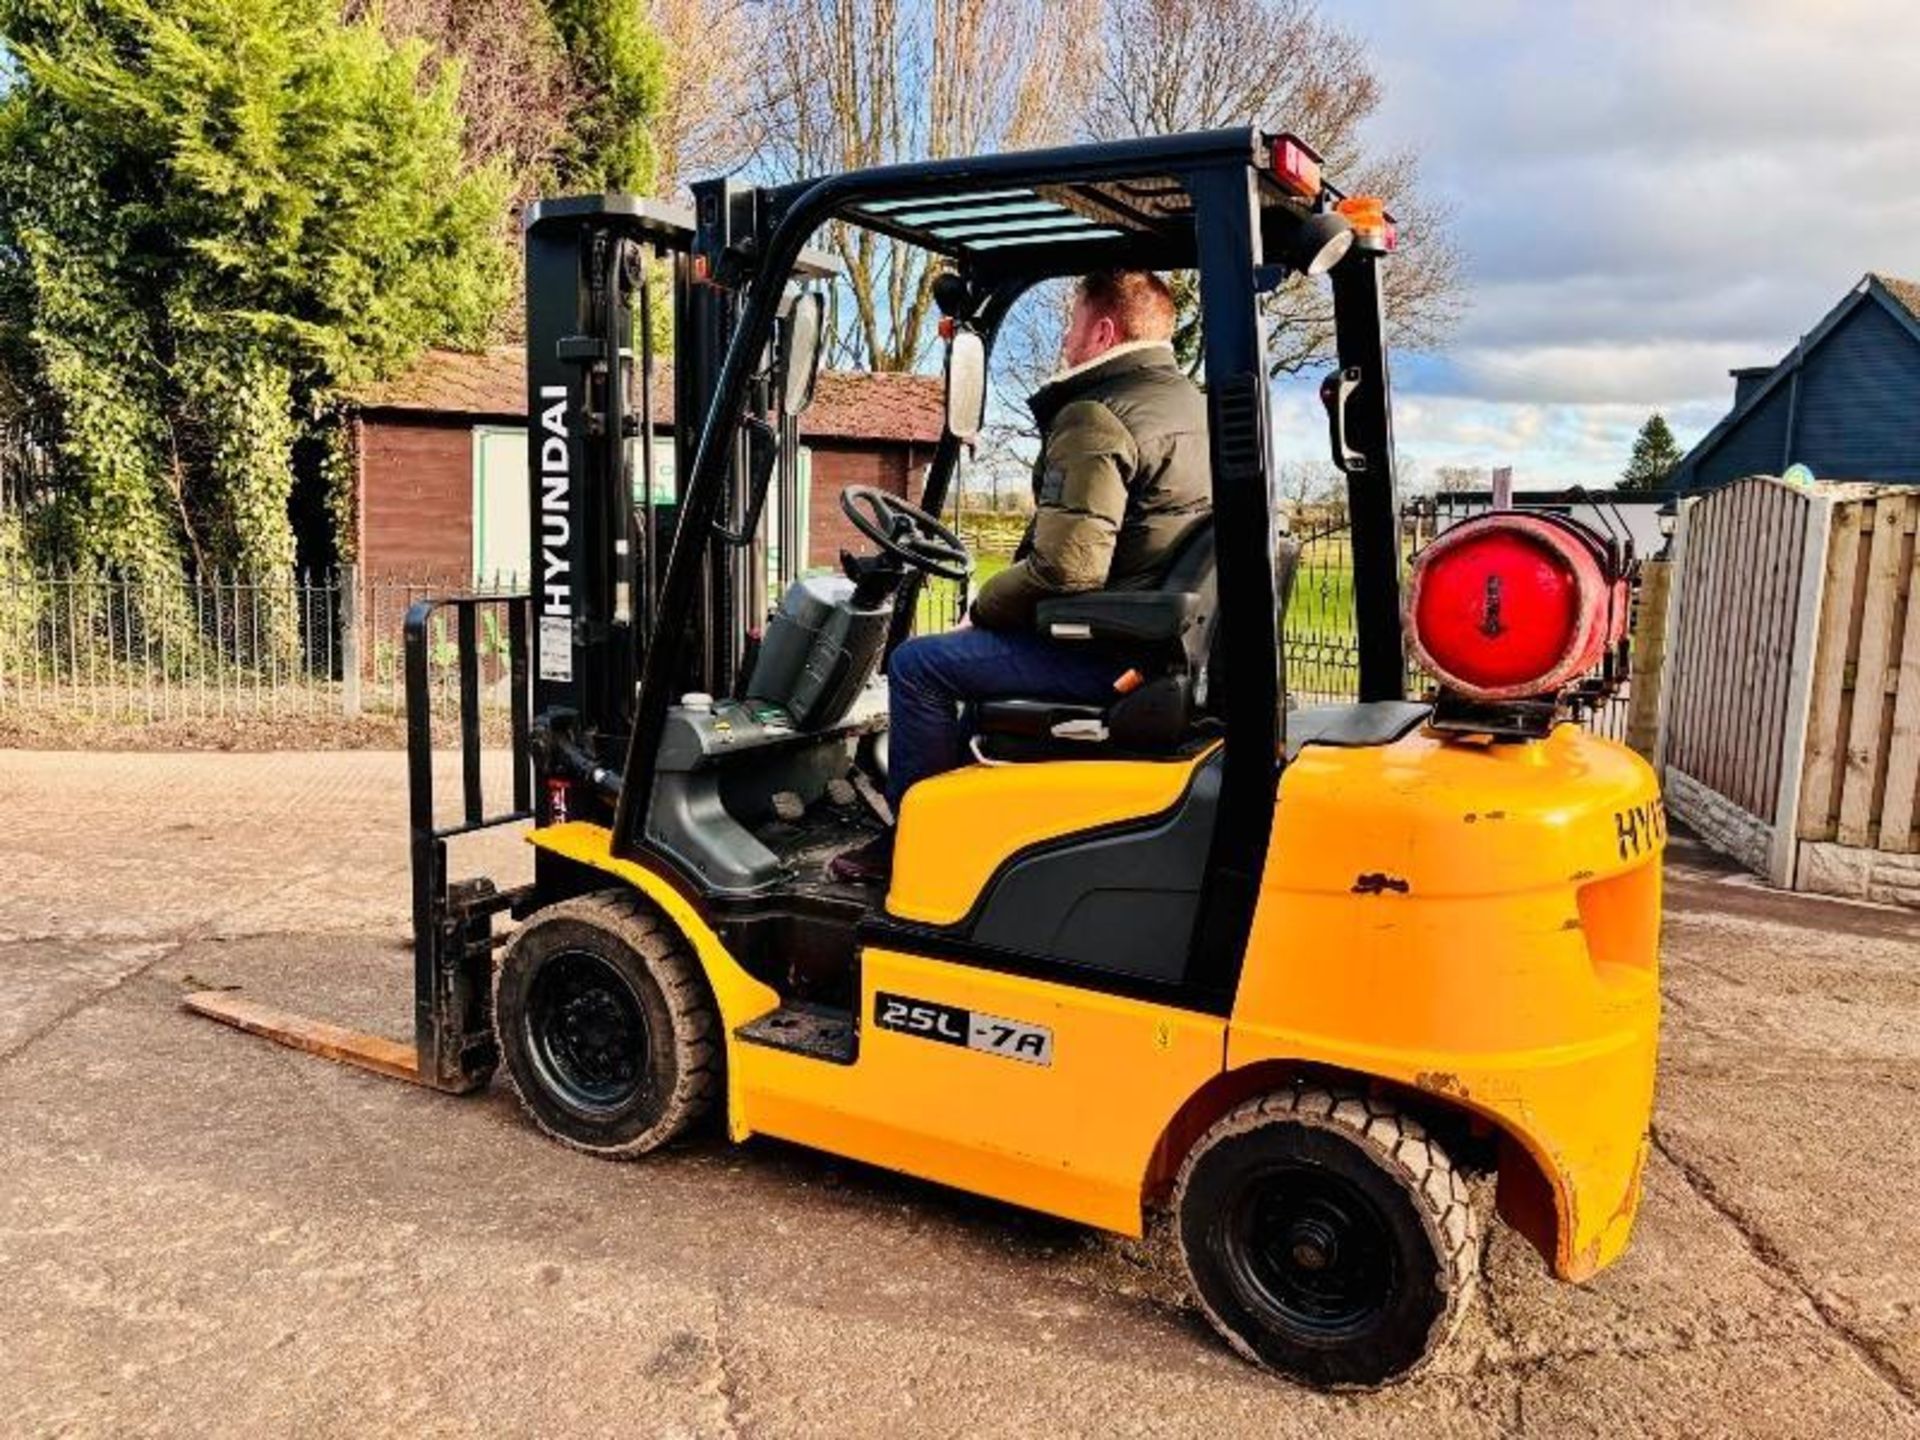 HYUNDAI 25L-7A CONTAINER SPEC FORKLIFT *YEAR 2018, 2172 HOURS* C/W SIDE SHIFT - Image 4 of 17